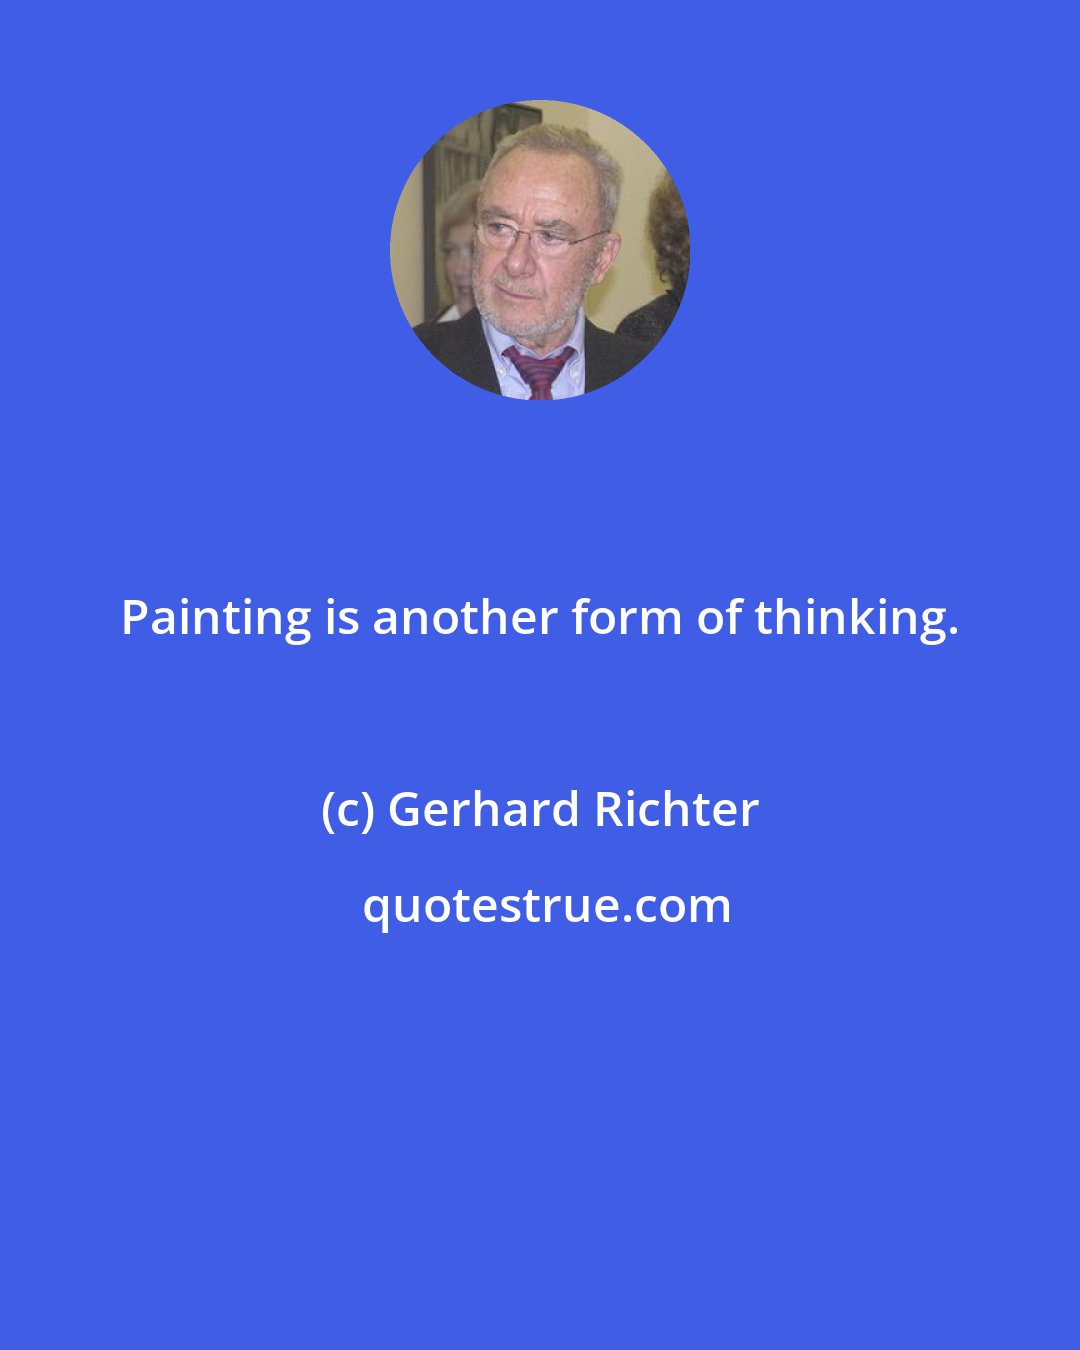 Gerhard Richter: Painting is another form of thinking.